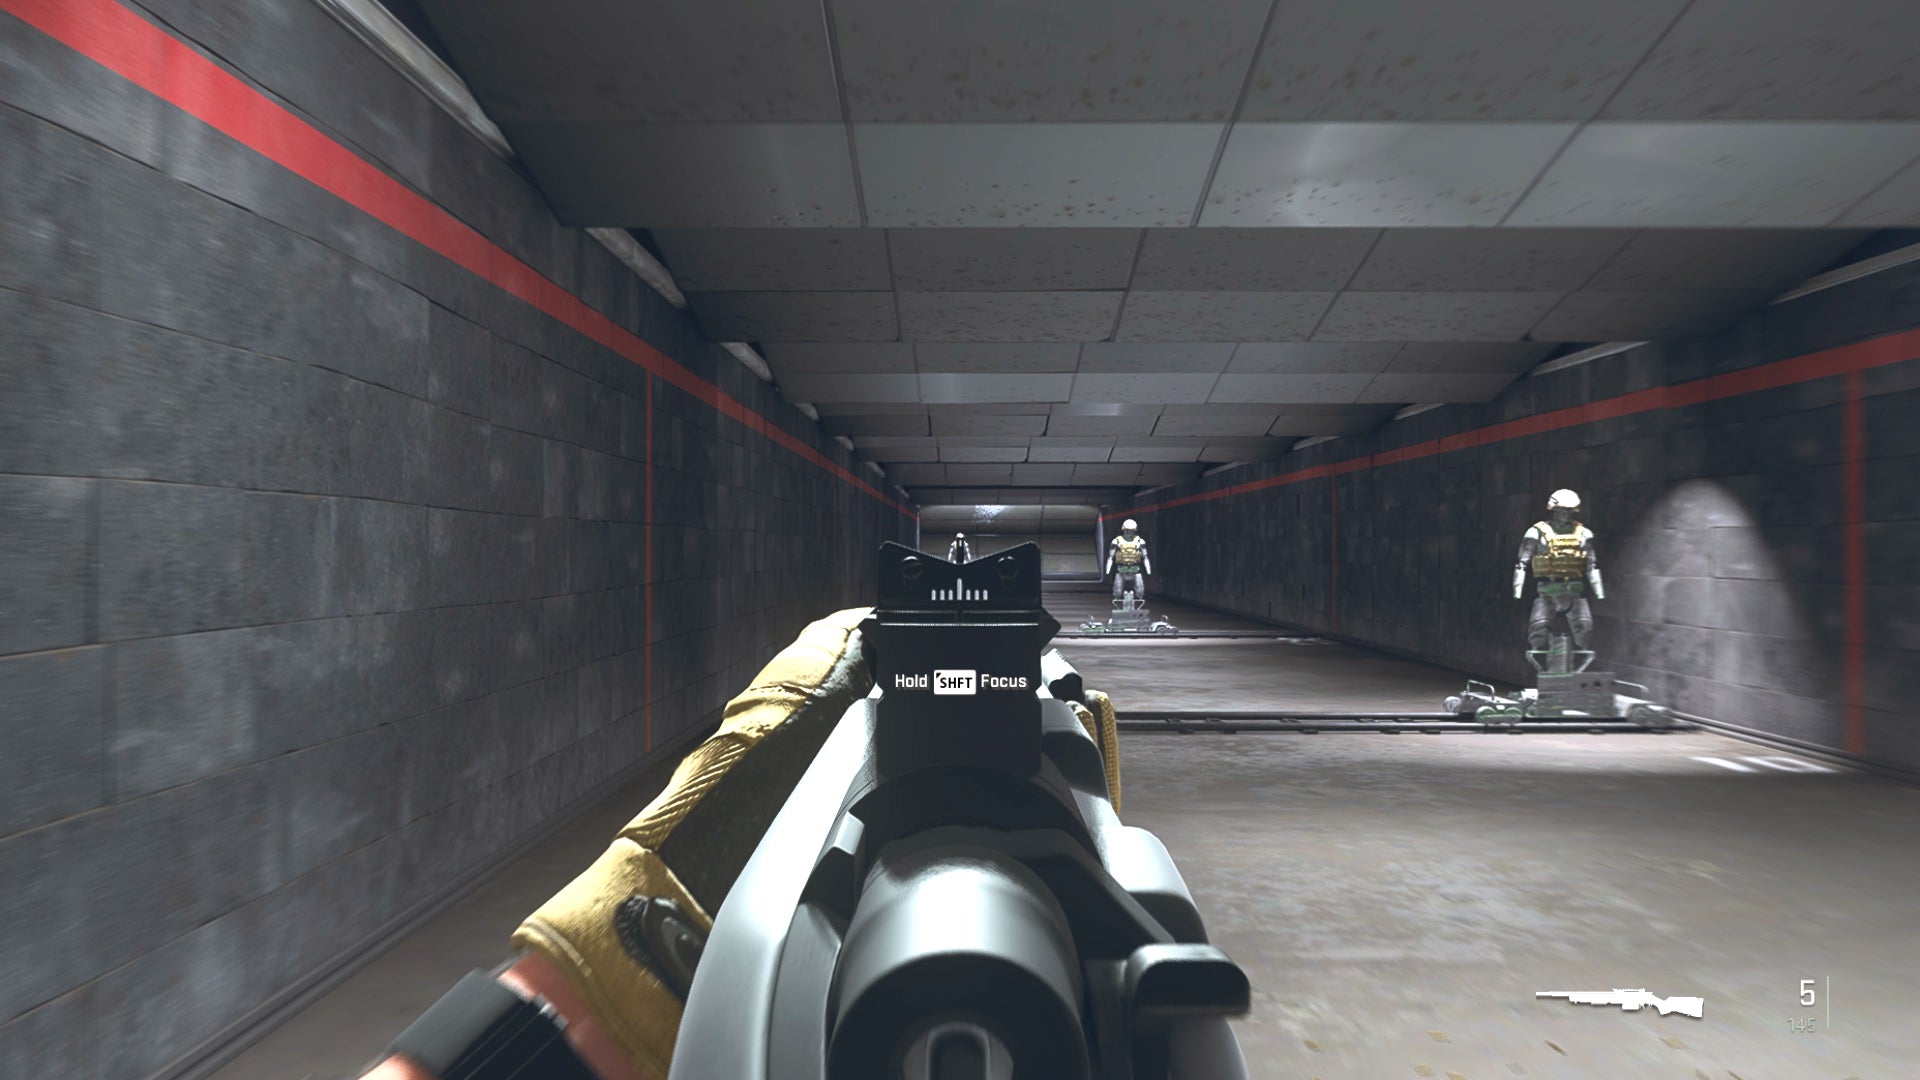 The player in Warzone 2.0 aims at a training dummy with the SP-R 208 ironsights.